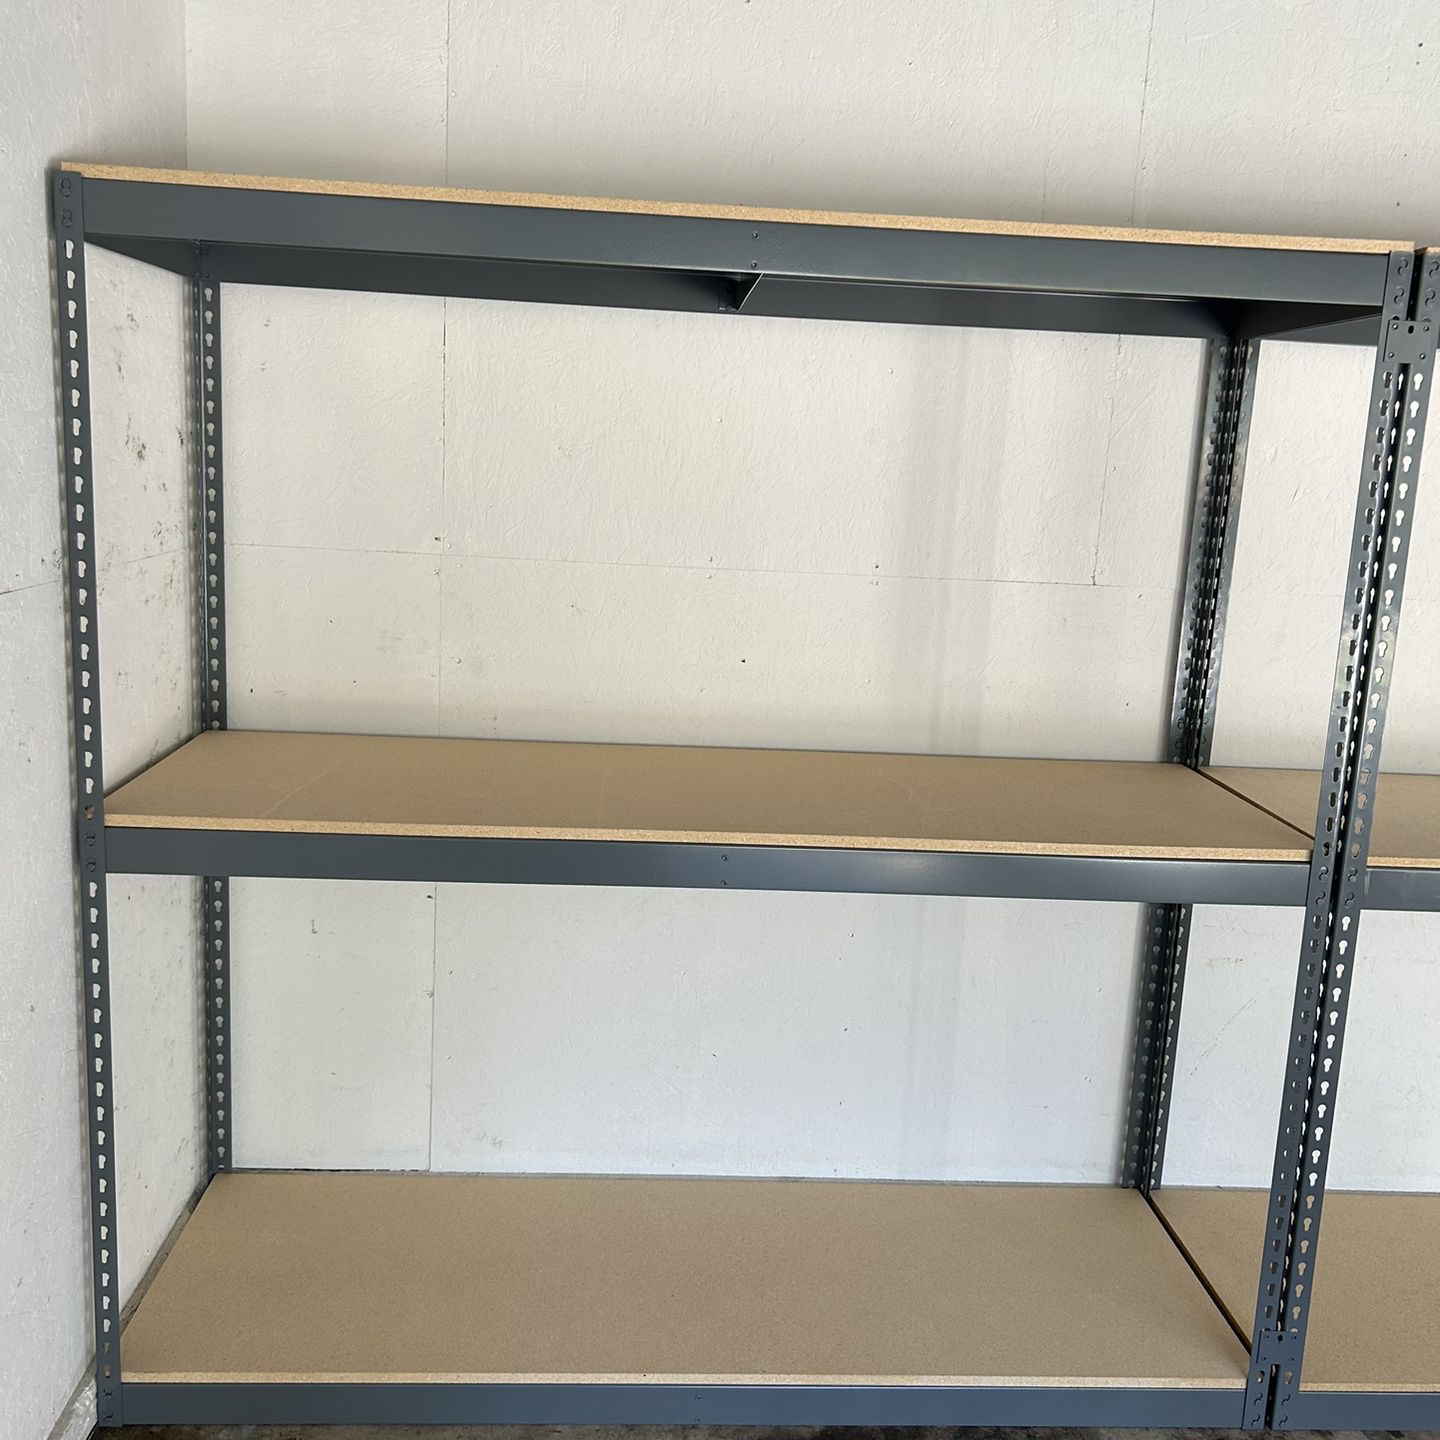 Garage Shelving 72 in W x 24 in D Boltless Shed Storage Shelves Heavy Duty Stronger than Homedepot & Lowes Racks Delivery Available